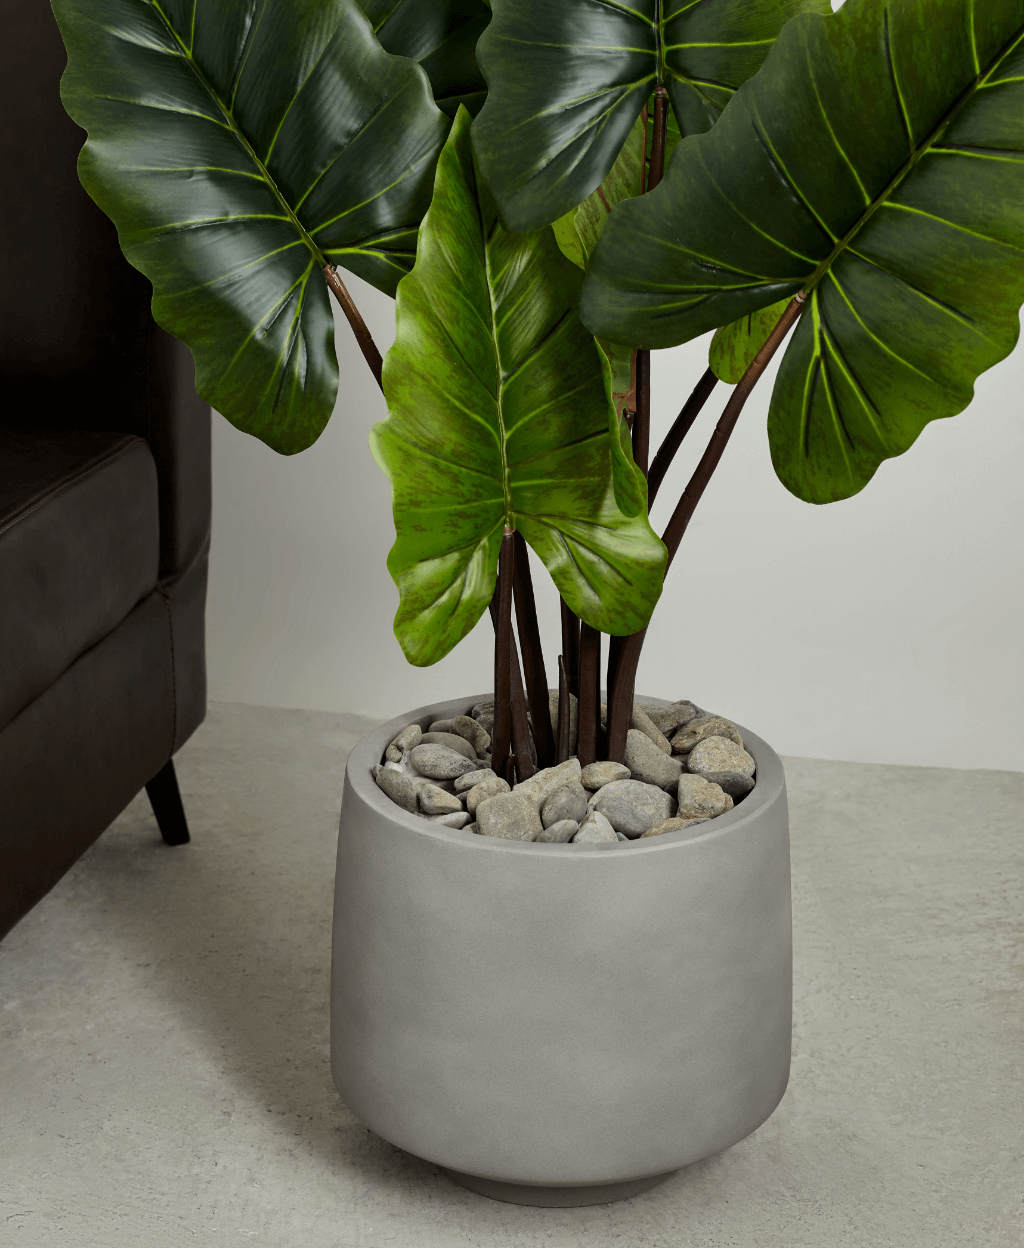 large-nordic-minimalist-light-cement-concrete-lightweight-round-planter-pot-15-11-inch-fiddle-fig-ficus-rubber-burgundy-cement-charcoal-1.jpg?t=woocommerce_gallery_thumbnail